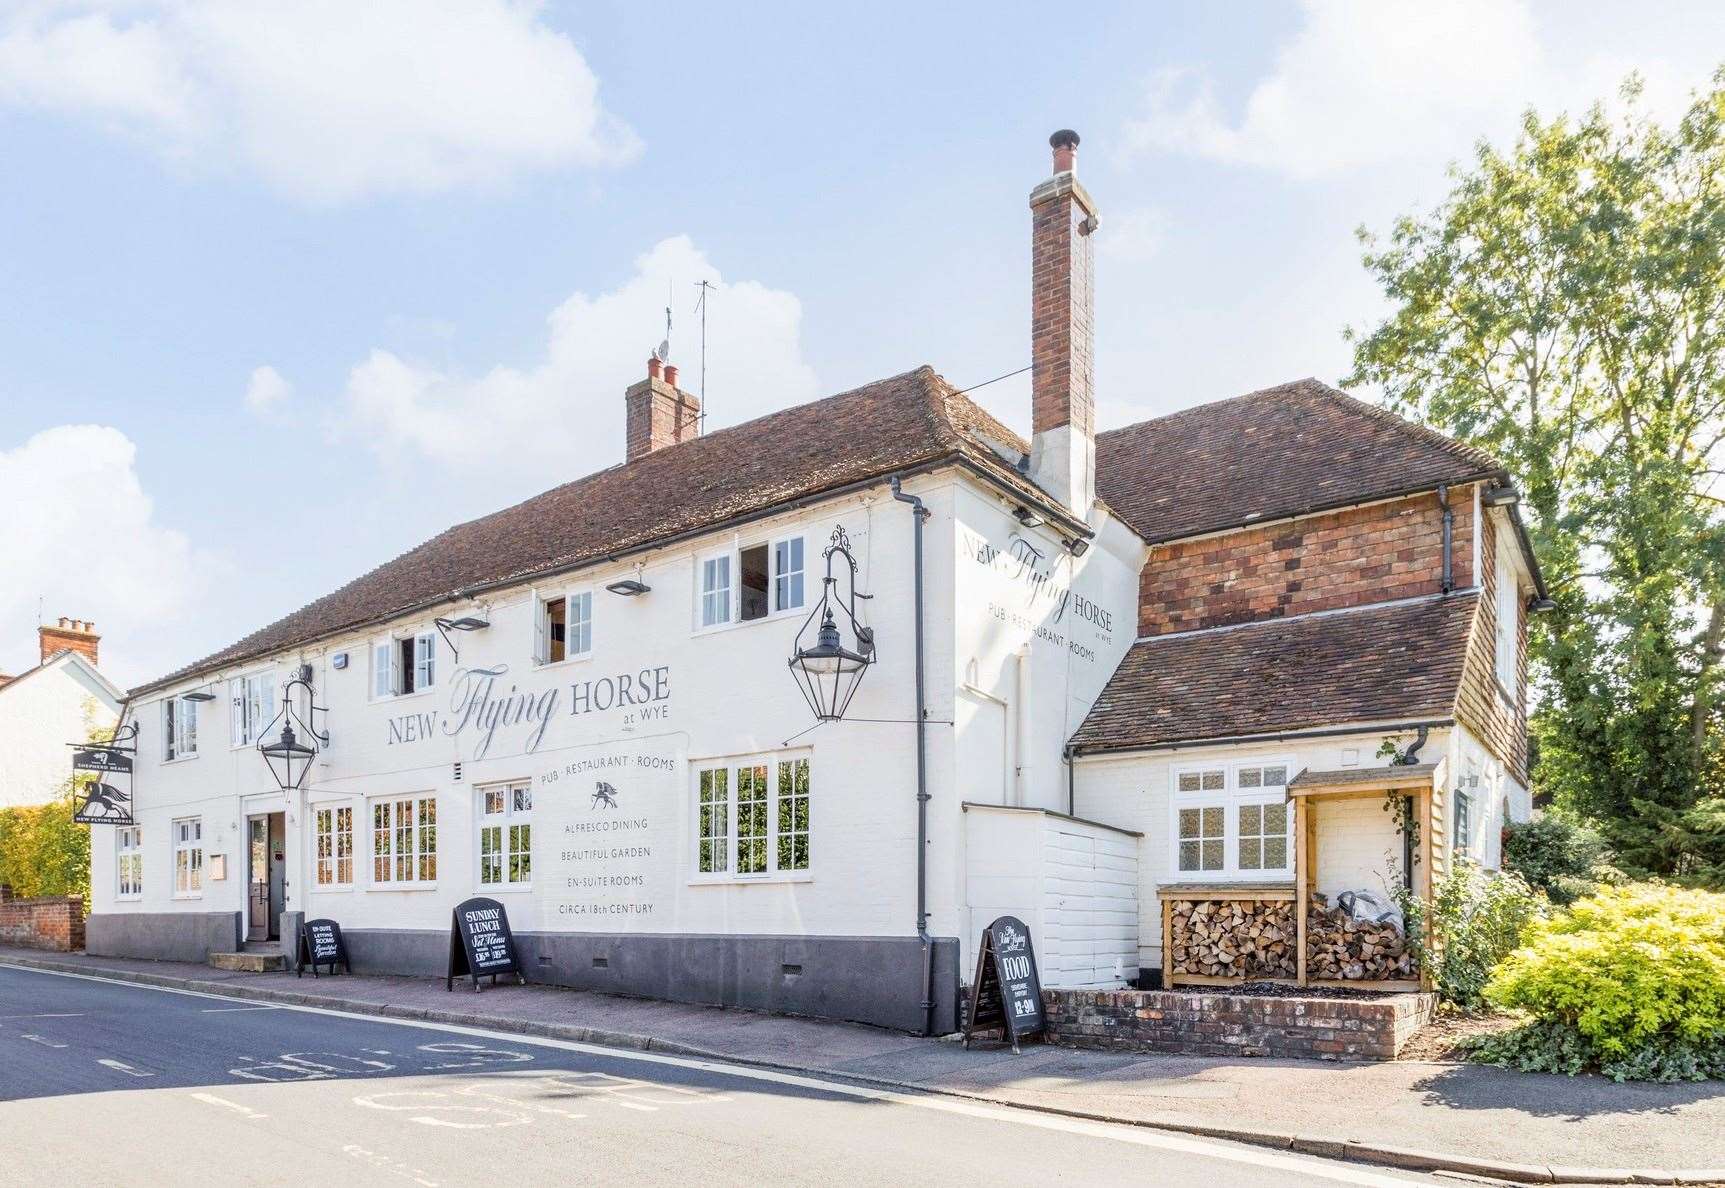 The New Flying Horse, Wye was named Shepherd Neame Pub of the Year. Picture: Shepherd Neame